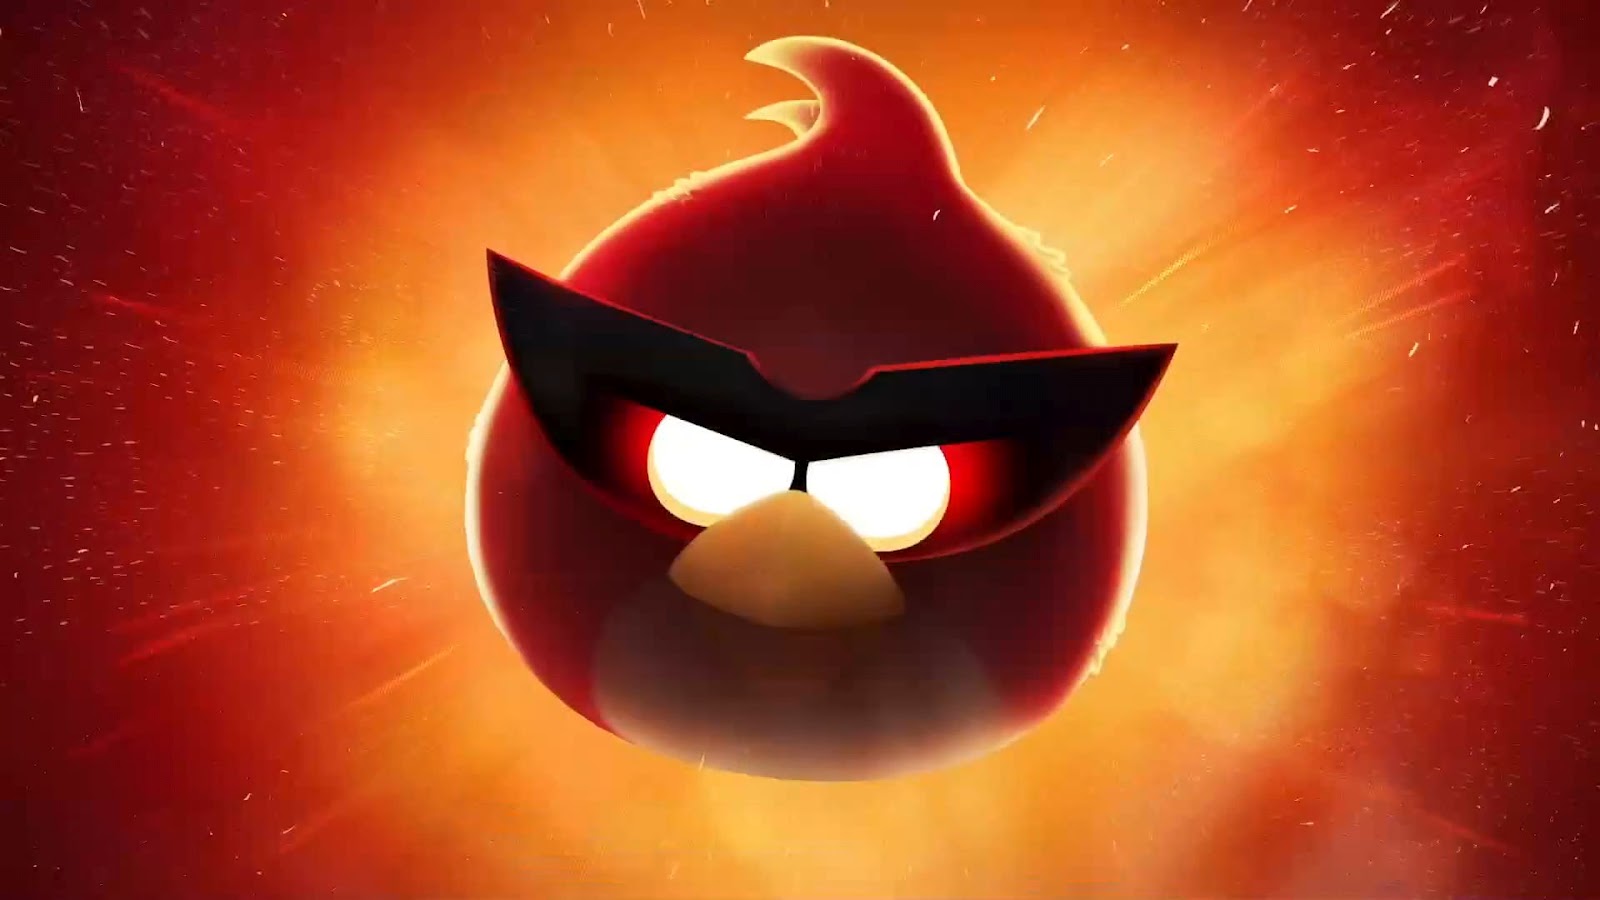 Latest Angry Birds Hd Wallpapers Free Download | New HD Wallpapers ...